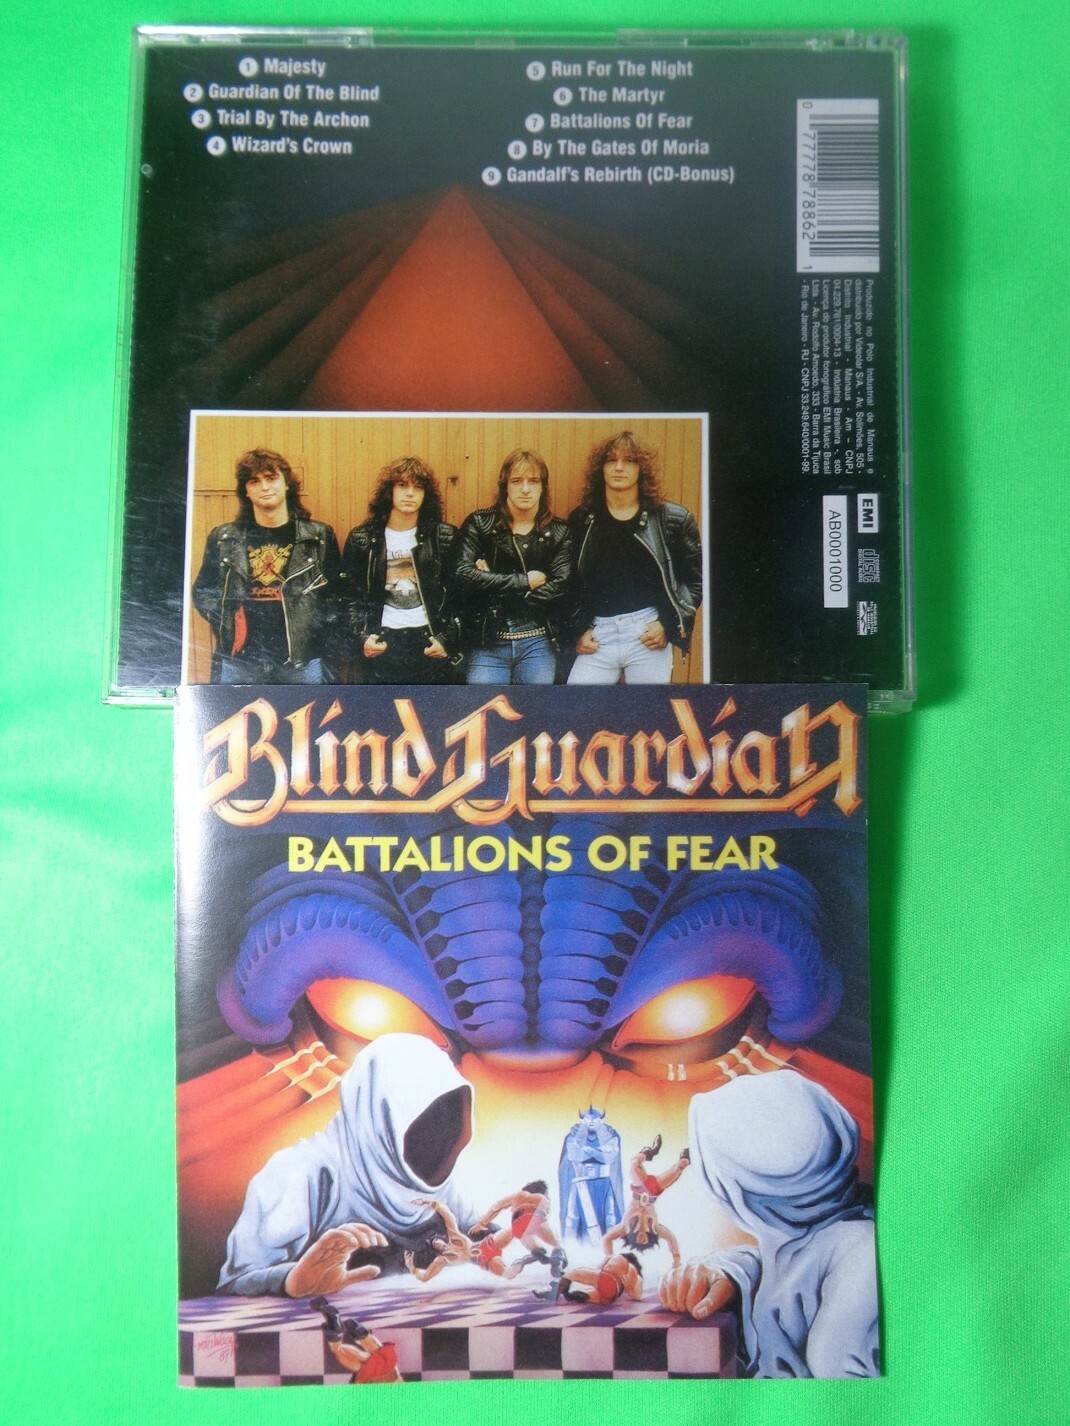 CD - Blind Guardian - Battalions of Fear